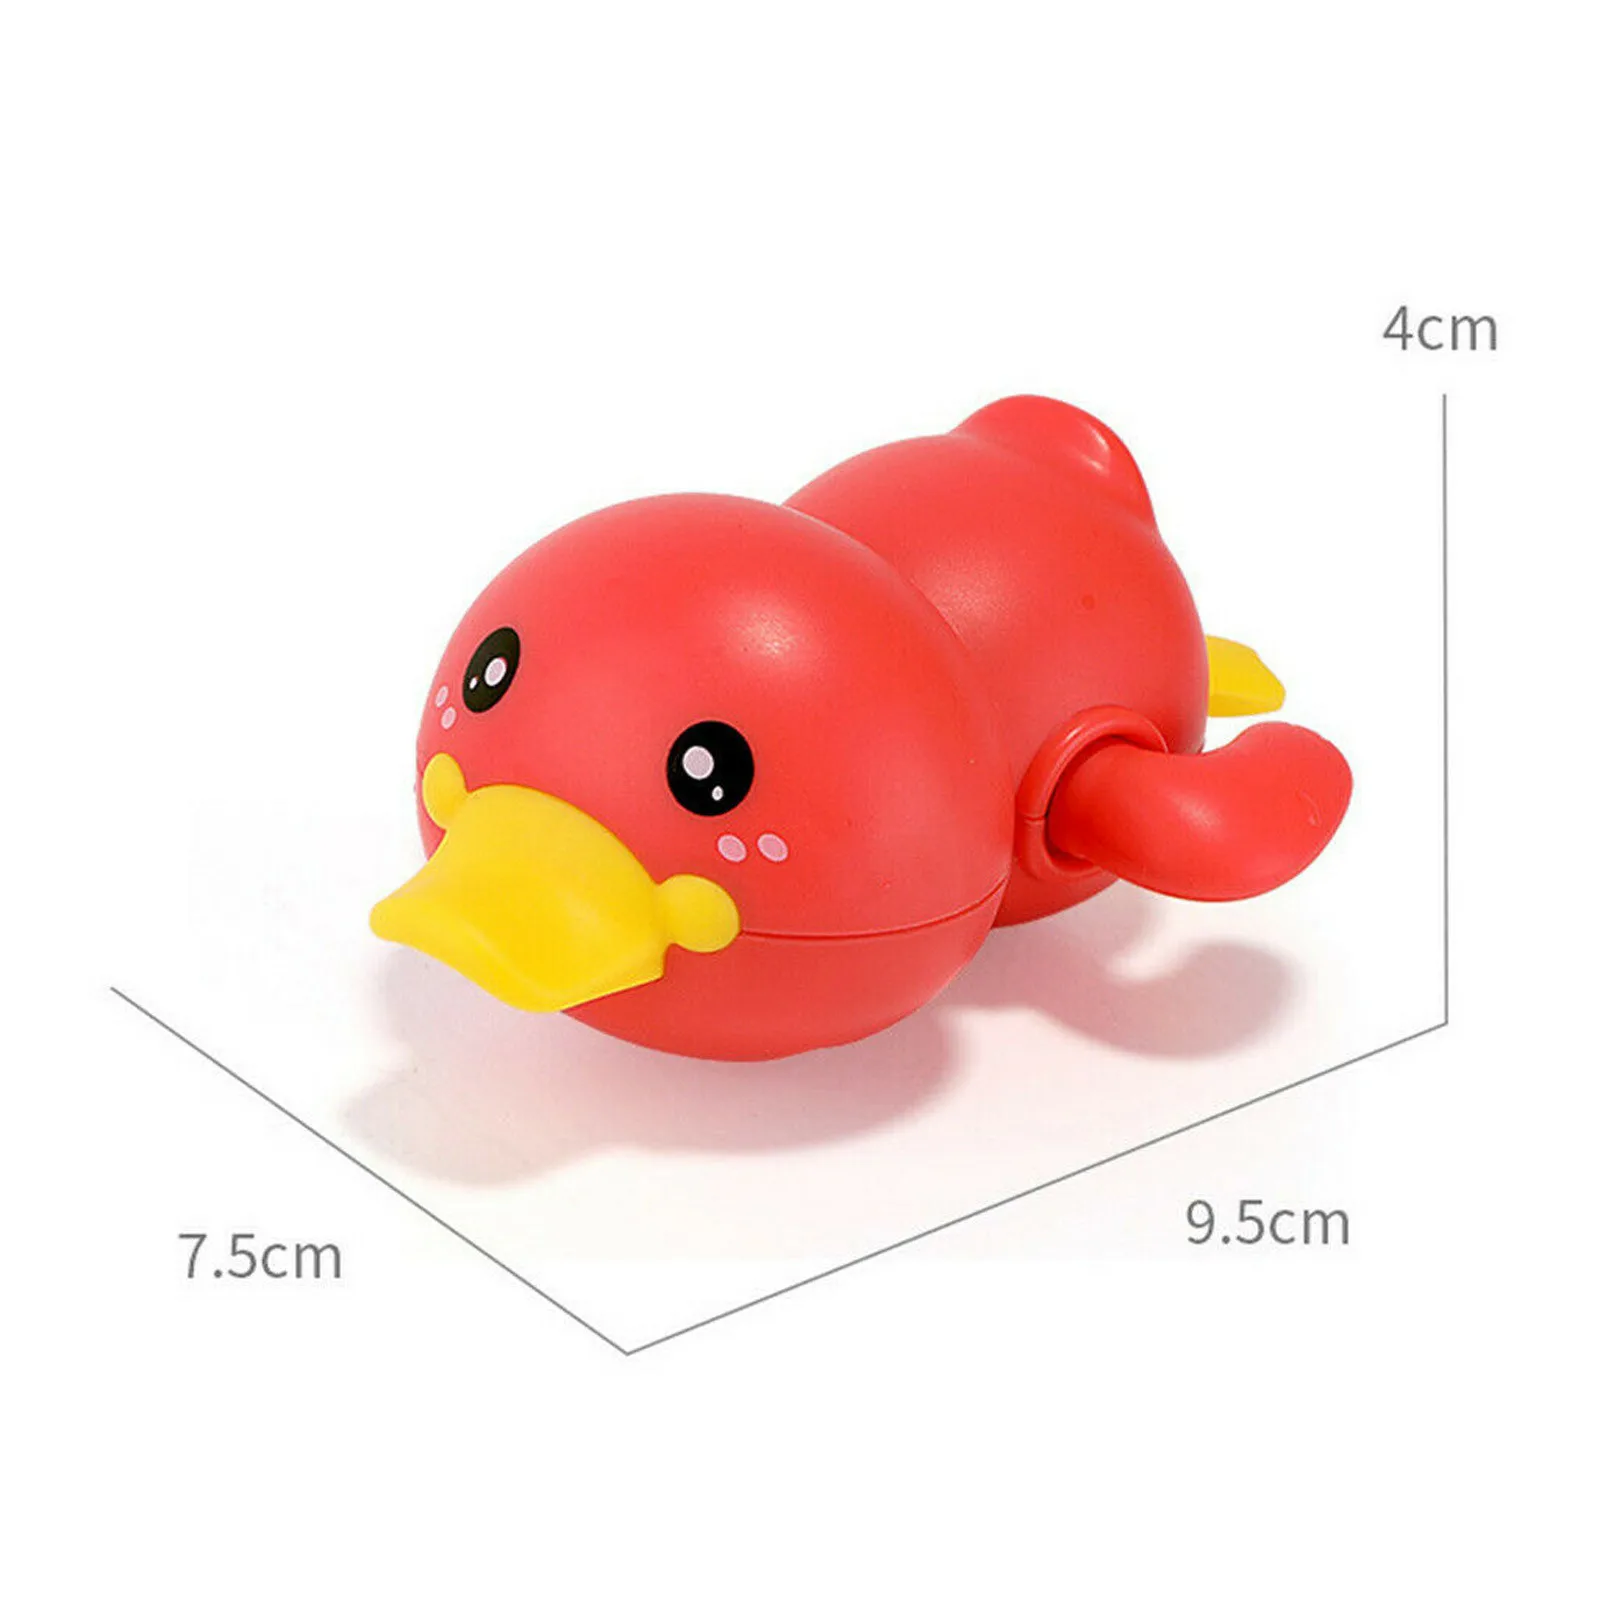 best Baby & Toddler Toys Baby Bath Toys Bathing Ducks Cartoon Animal Whale Crab Swimming Pool Classic Chain Clockwork Water Toy For Infant 0 24 Months top Baby & Toddler Toys